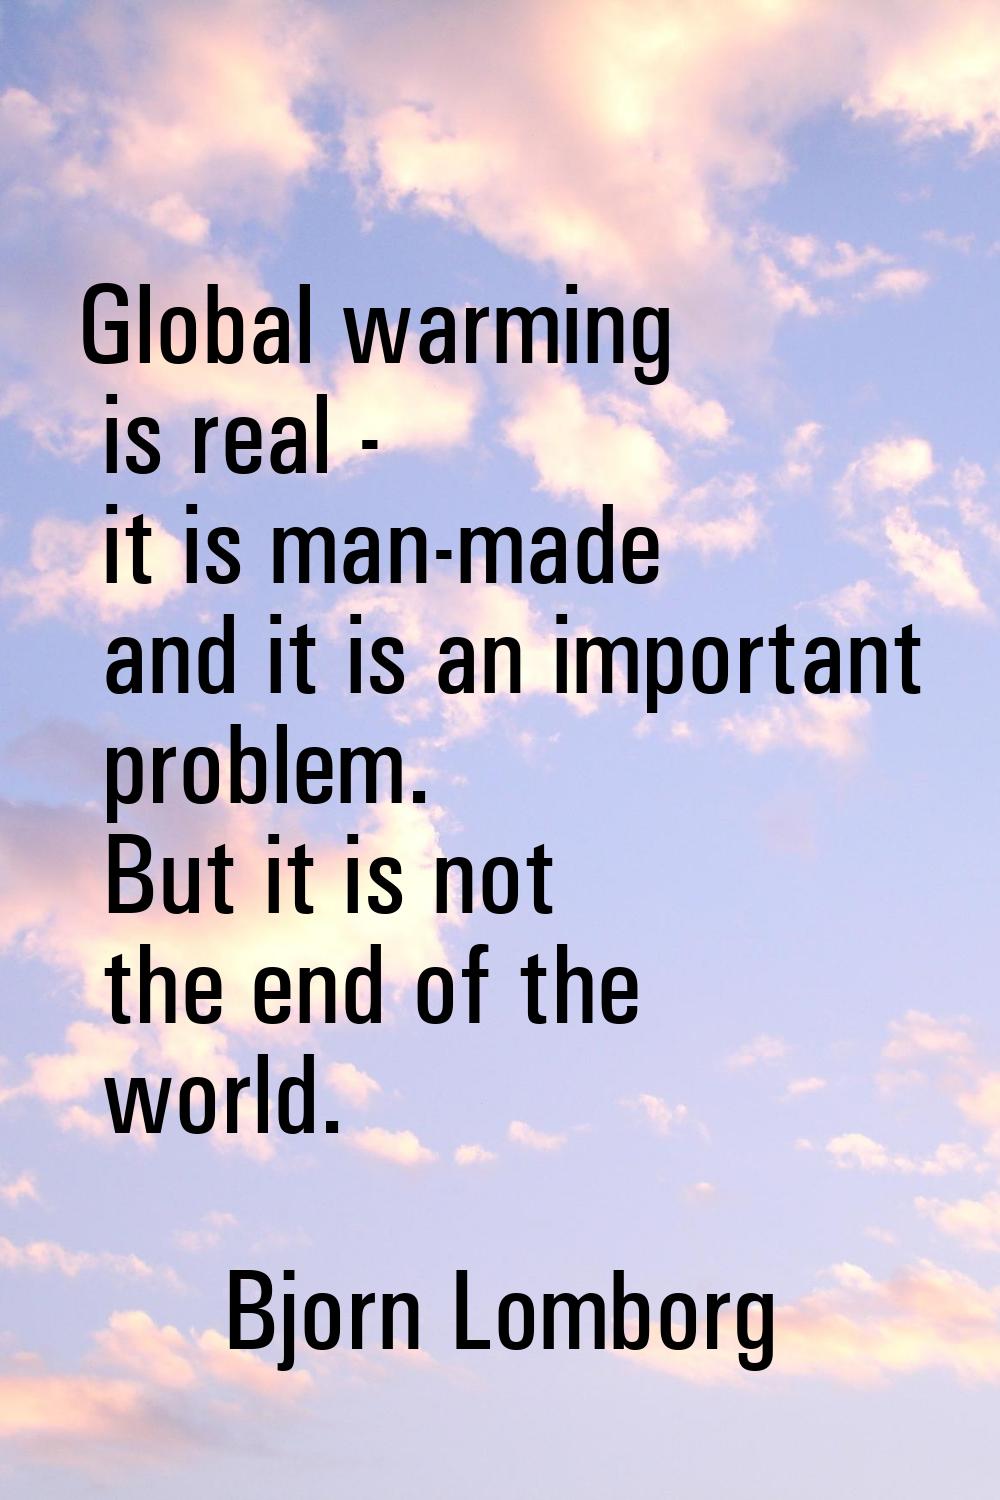 Global warming is real - it is man-made and it is an important problem. But it is not the end of th